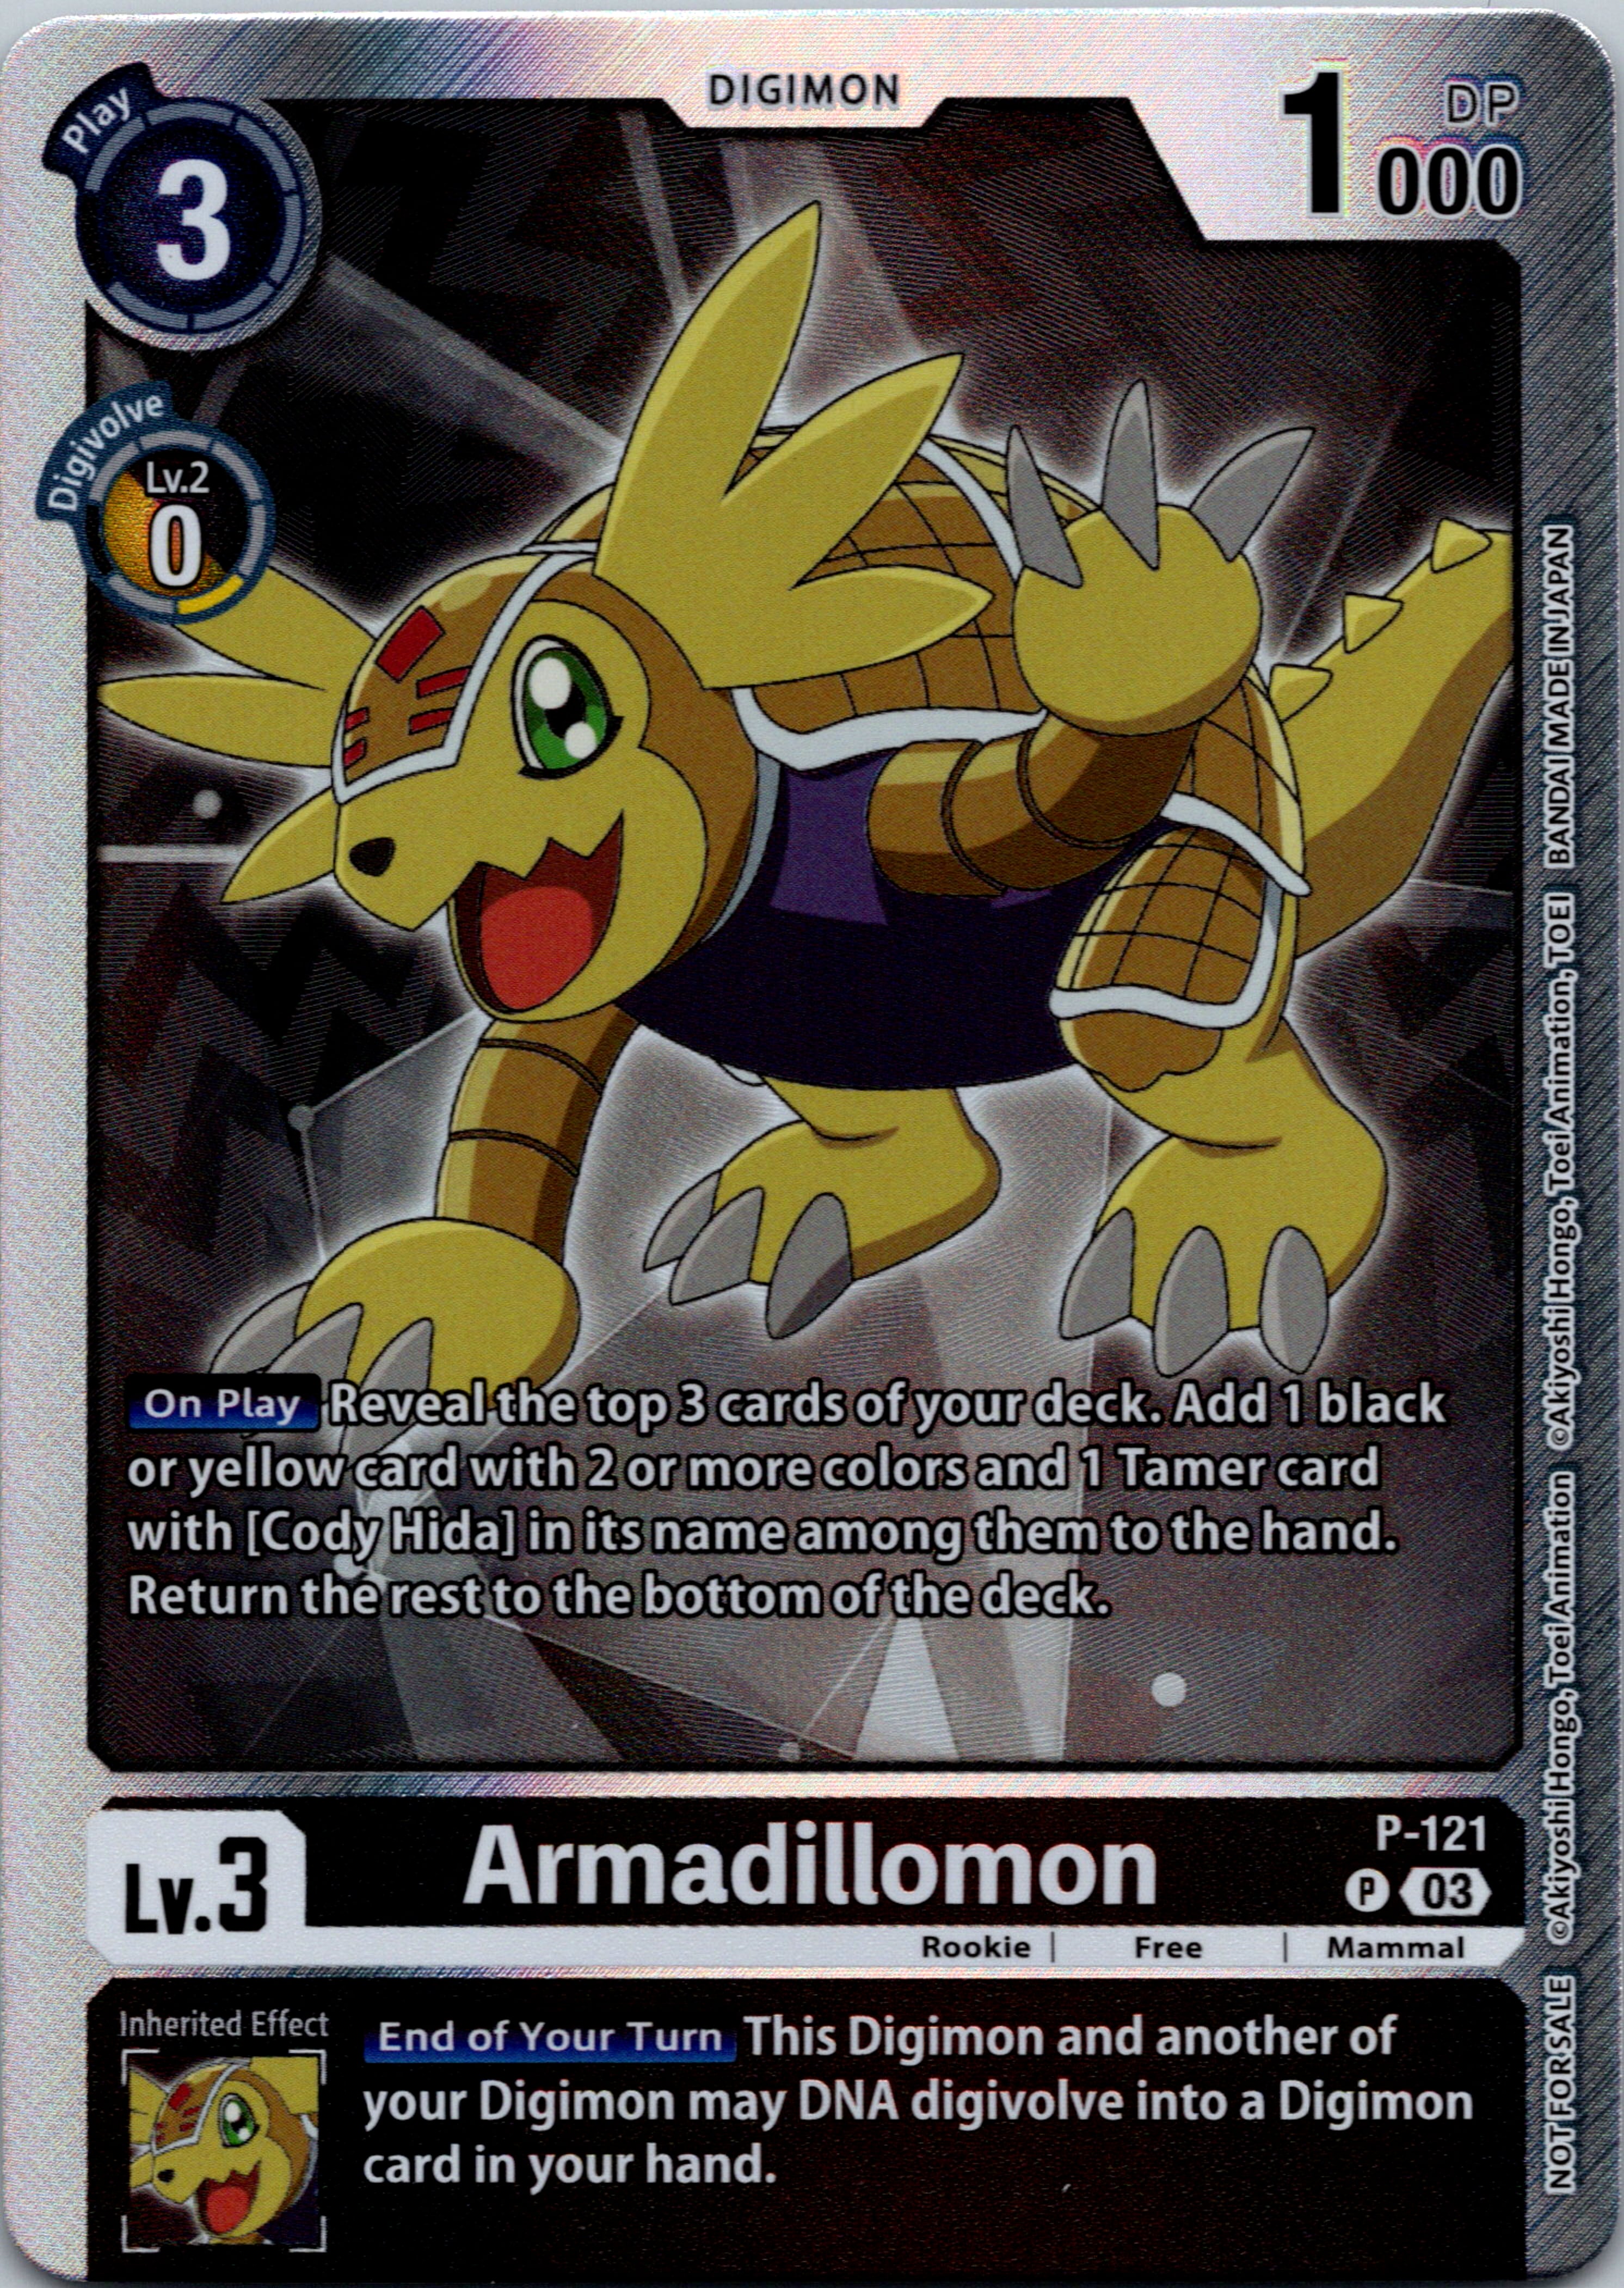 Armadillomon - P-121 (Tamer Party Pack -The Beginning- Ver. 2.0) [P-121] [Digimon Promotion Cards] Foil